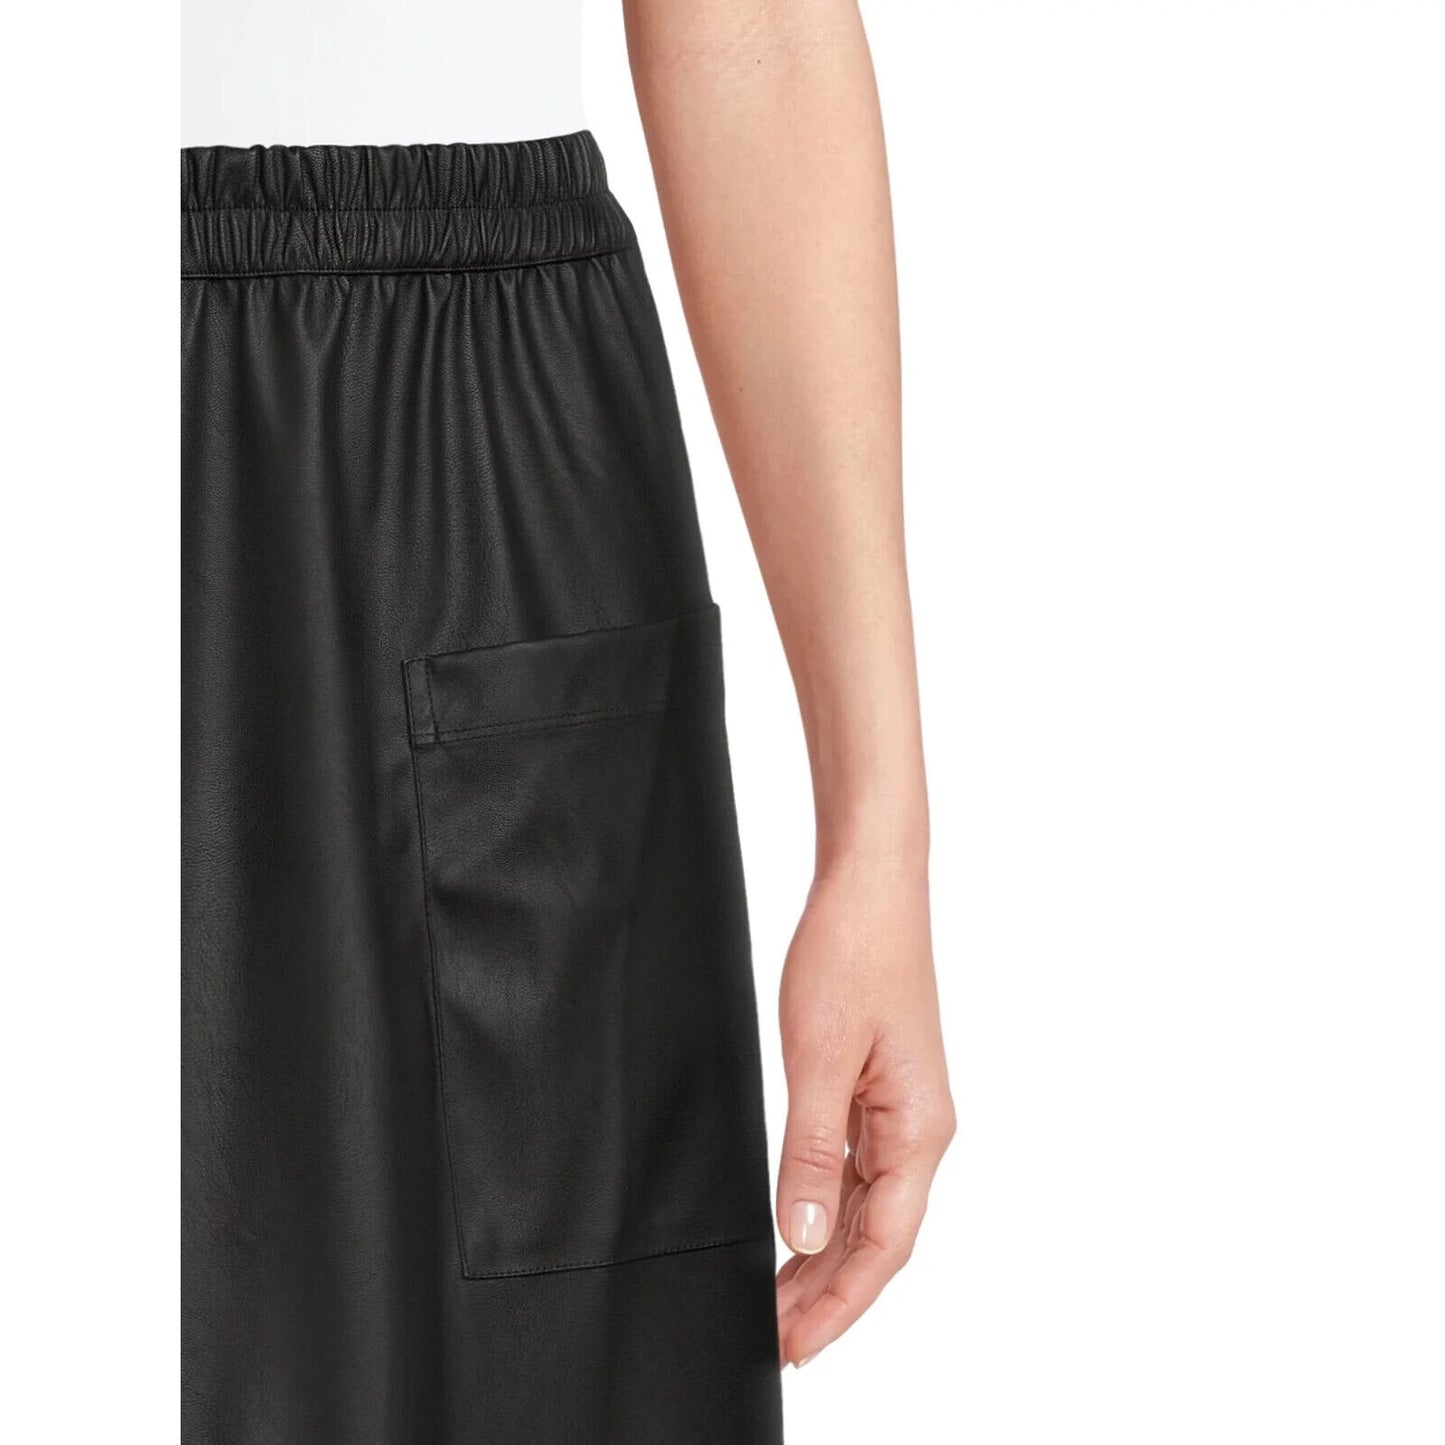 The Get Women's Faux Leather Midi Skirt M